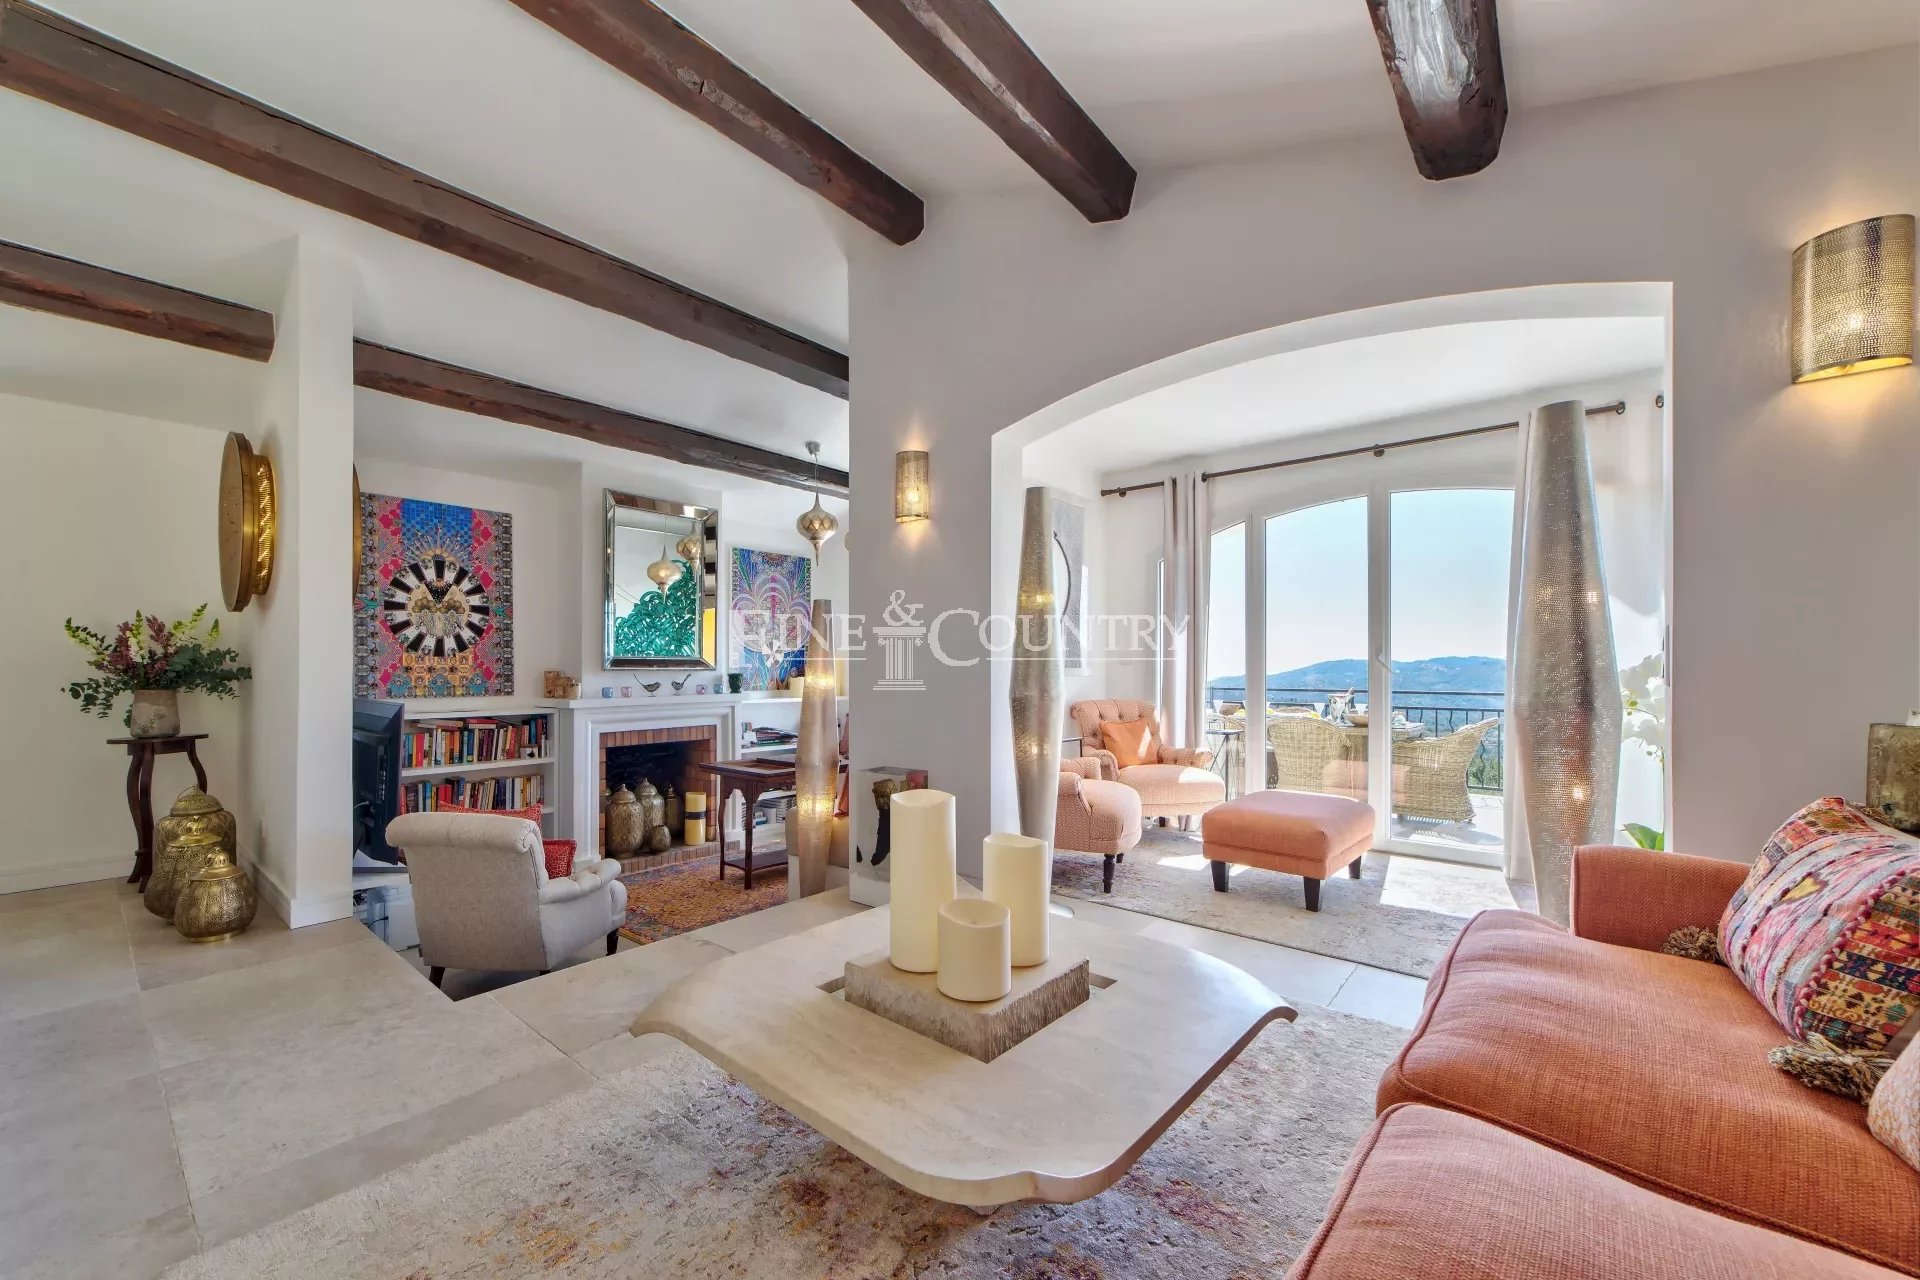 Villa for sale in Le Tignet, in the hills above Cannes